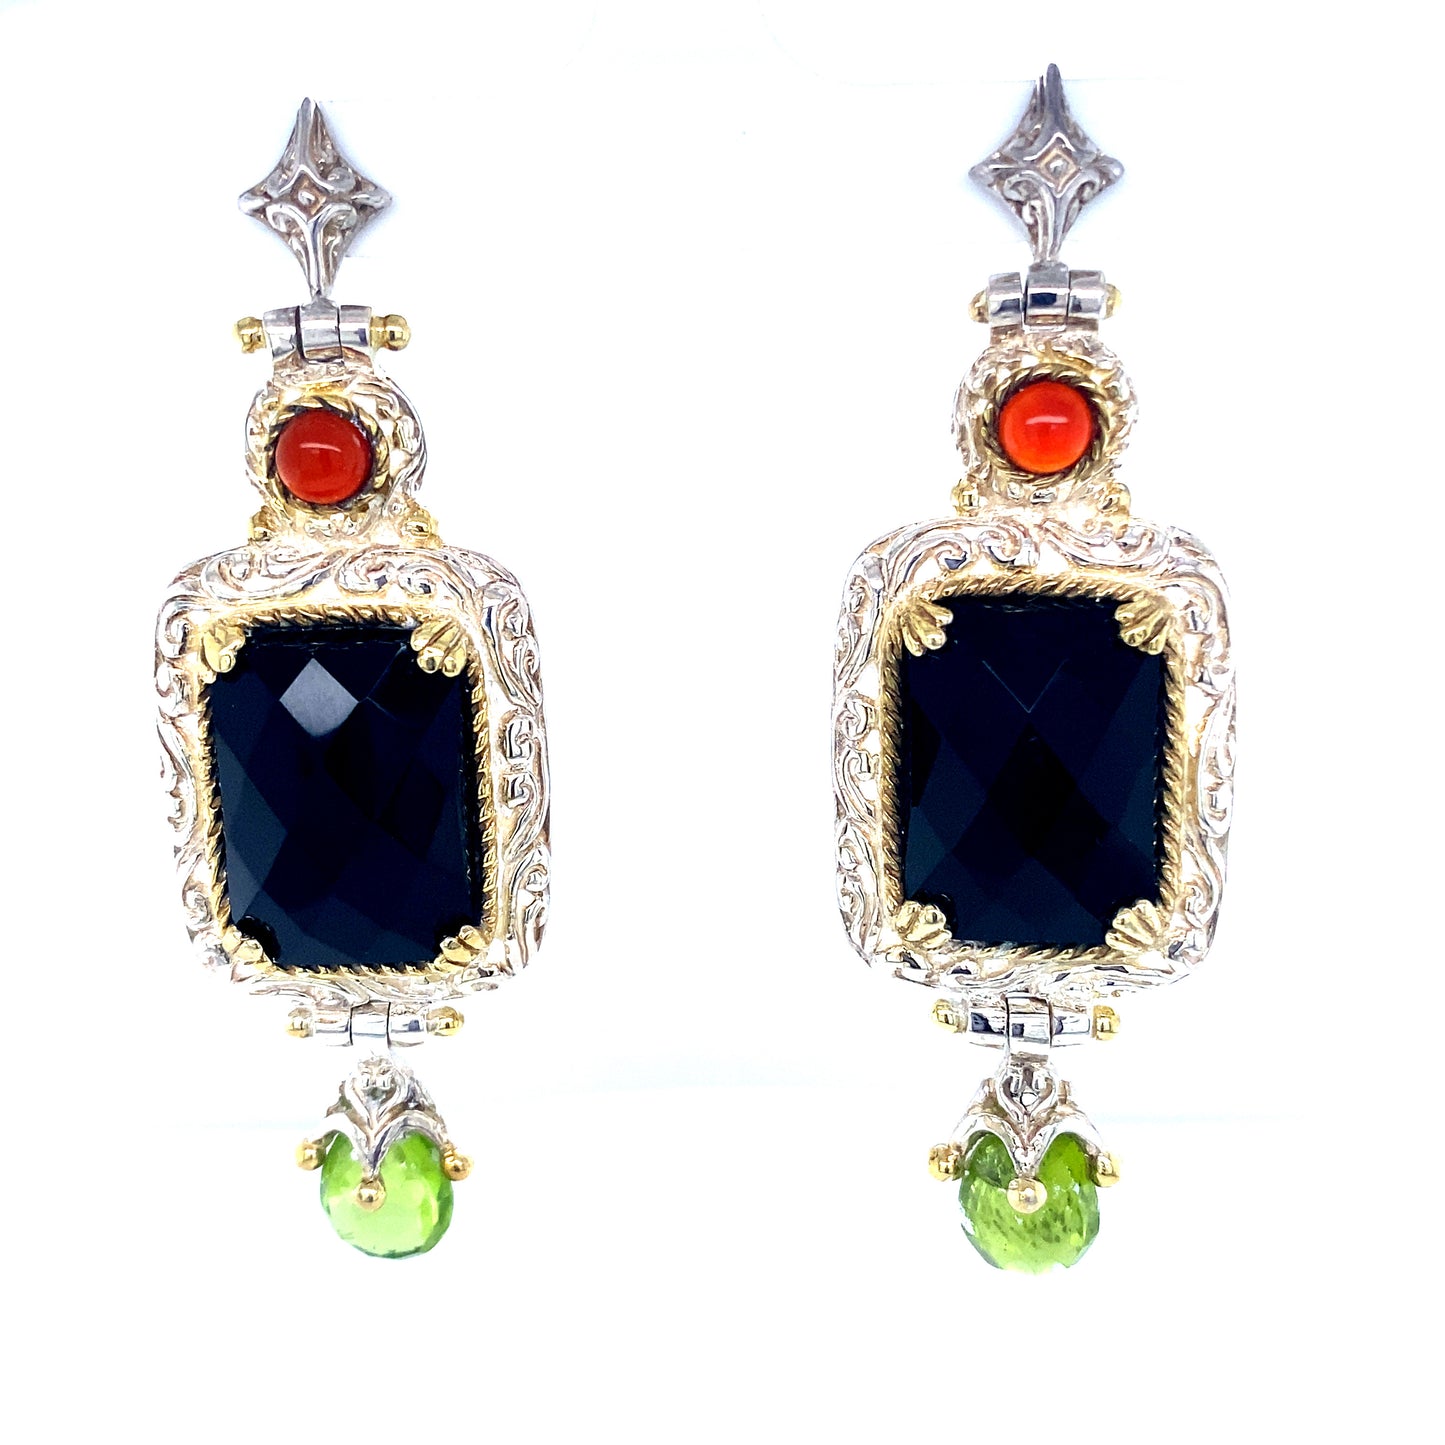 Silver onyx and coral and peridot earrings